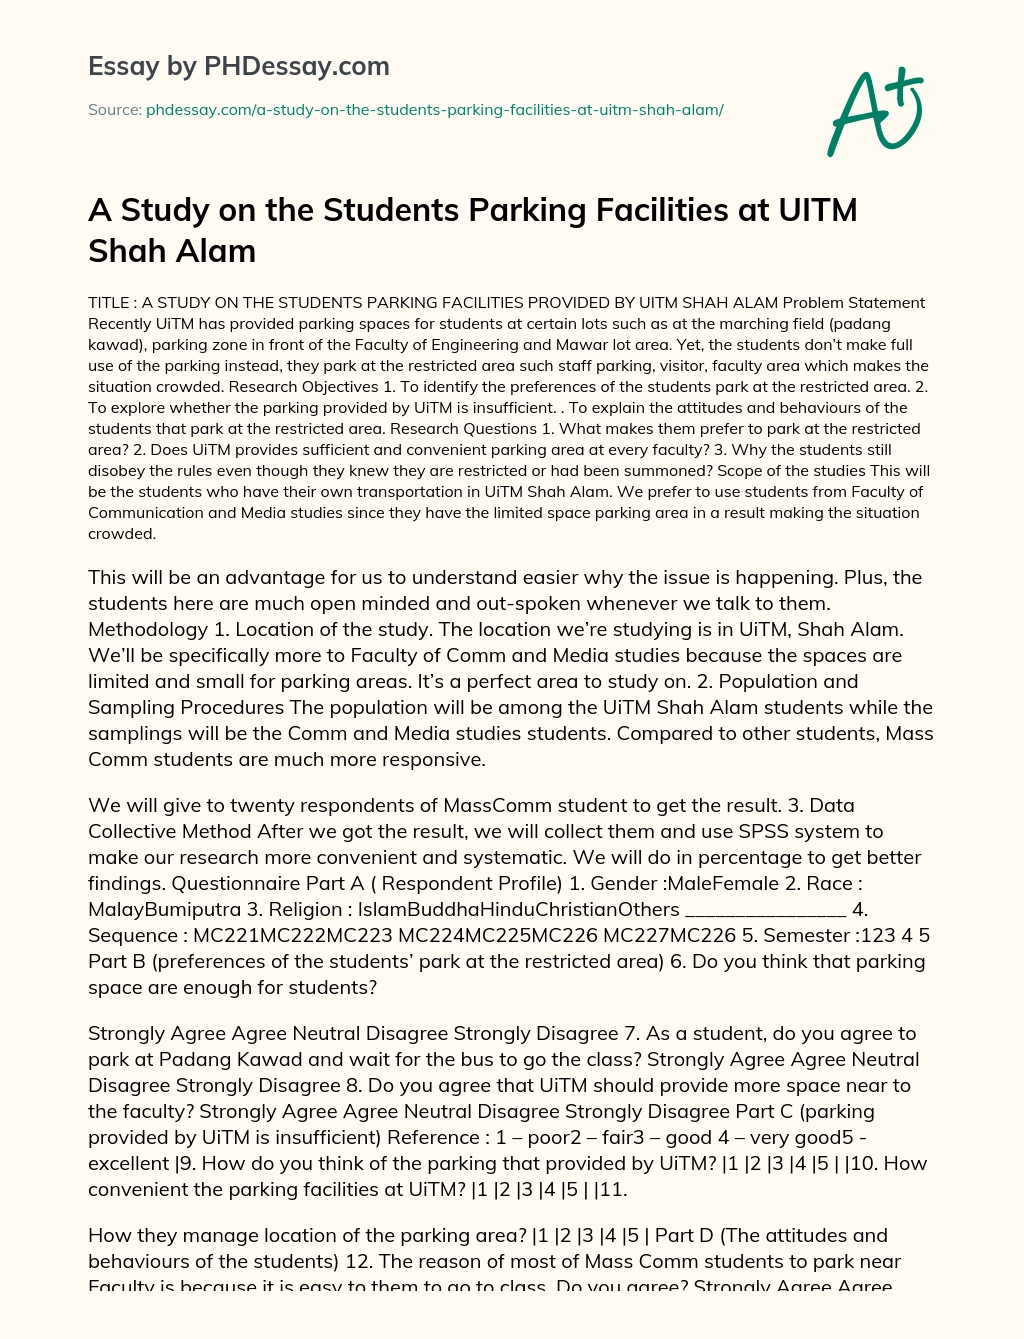 A Study on the Students Parking Facilities at UITM Shah Alam essay